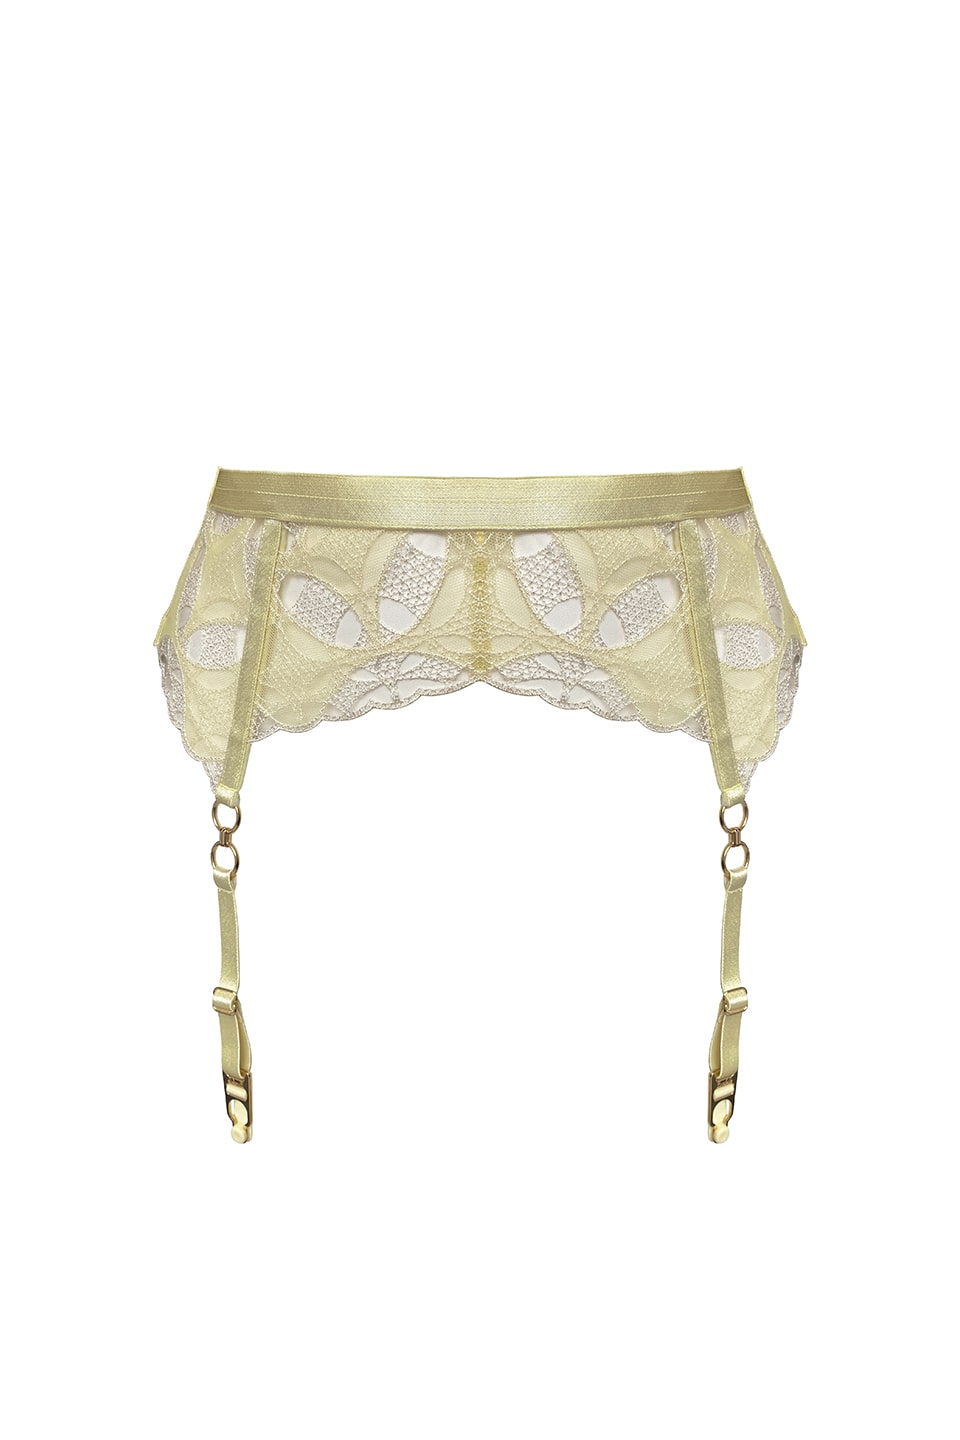 Shop online trendy Yellow Lingerie accessories from Bordelle Fashion designer. Product gallery 1